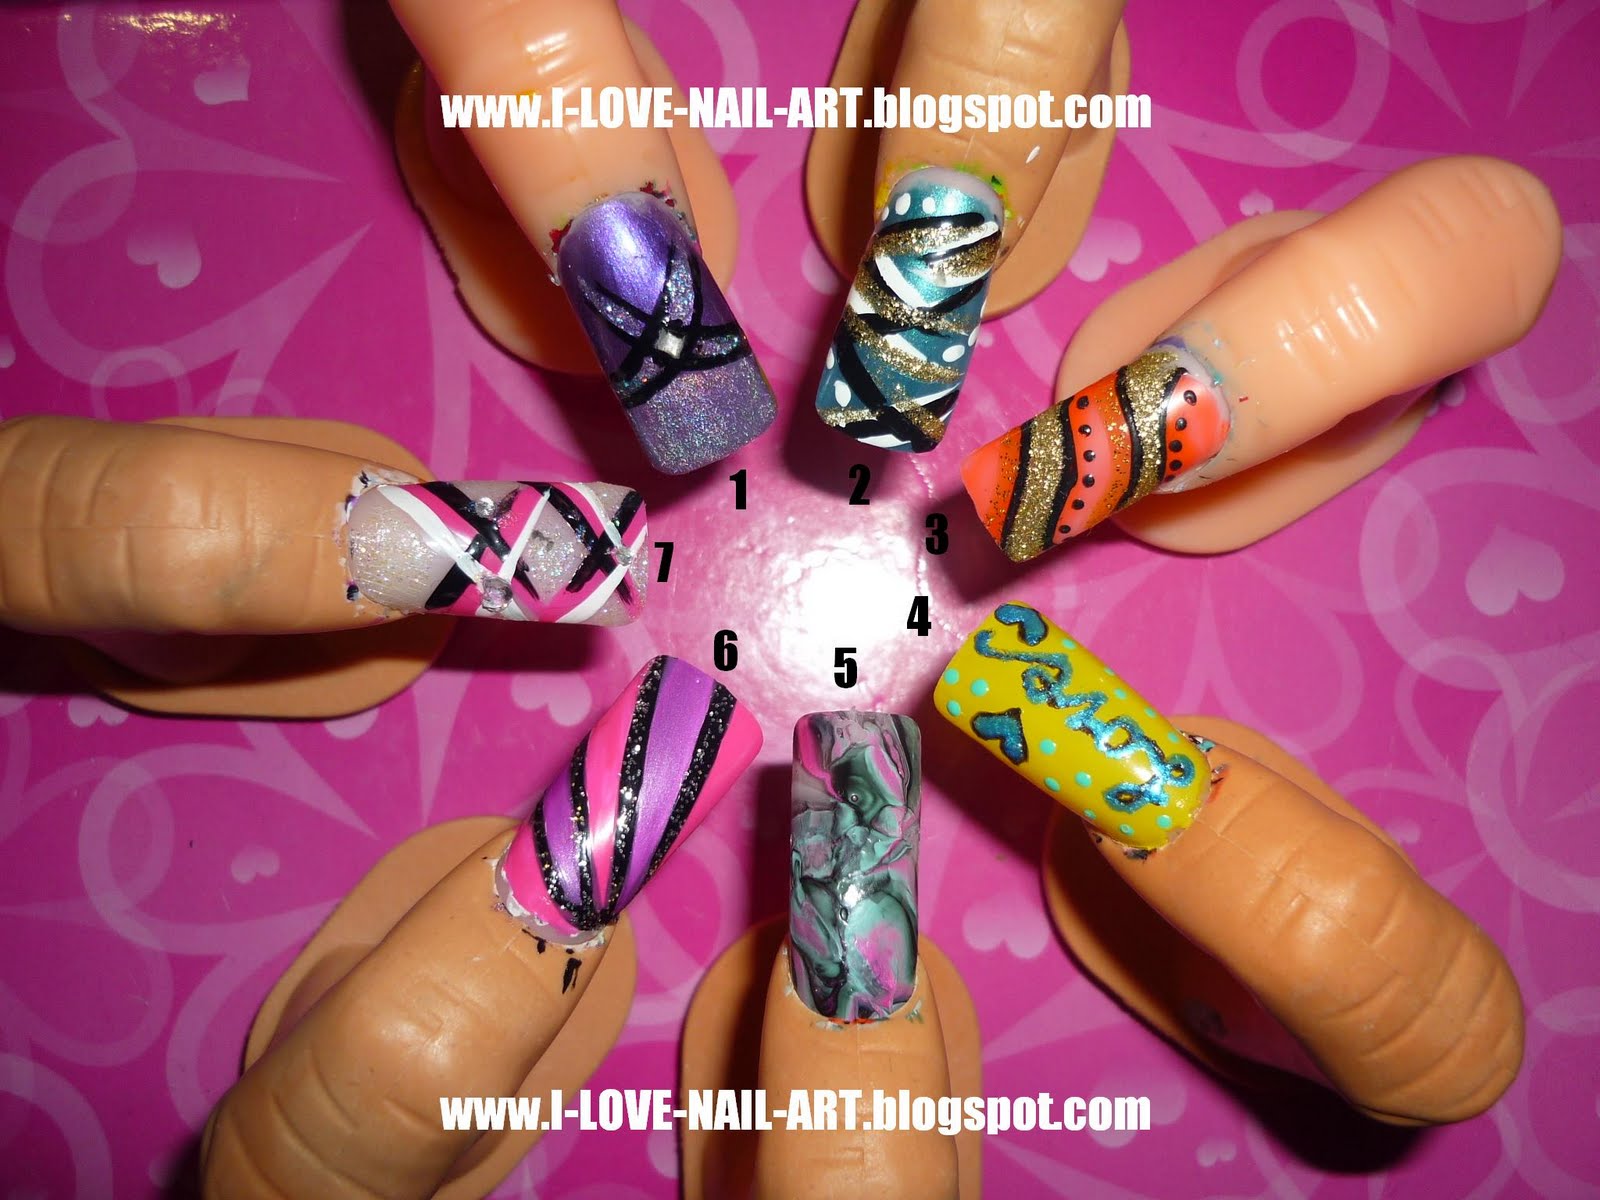 8. Interactive Nail Art: Insider Product Reviews and Recommendations - wide 3